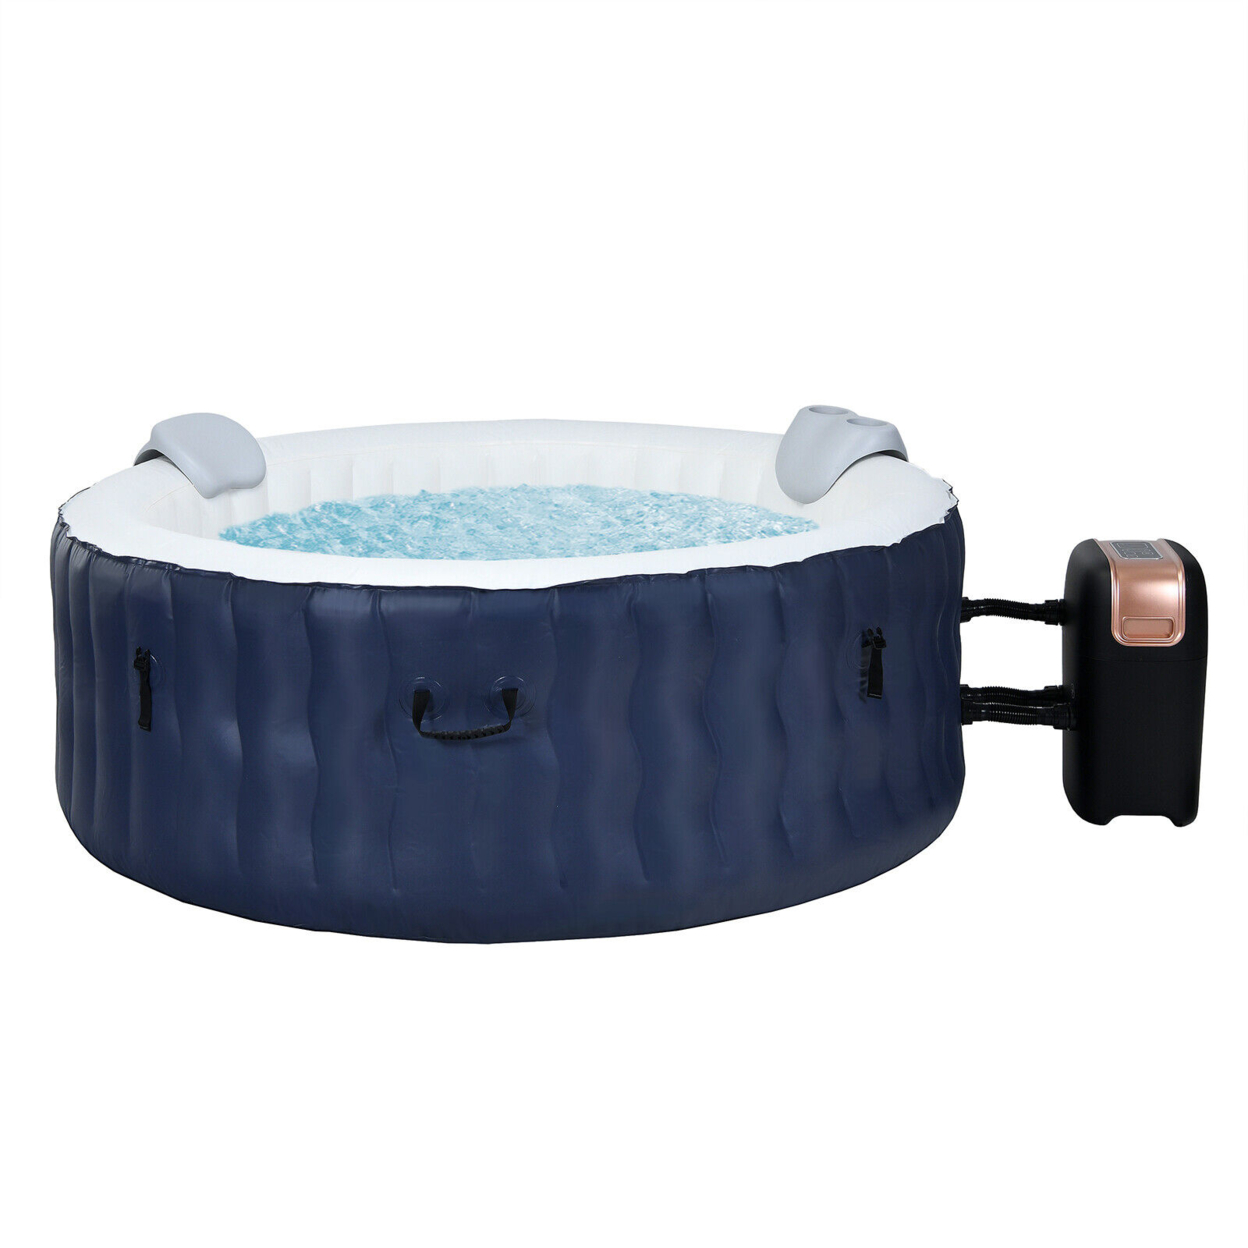 Inflatable Hot Tub Spa W/ 108 Massage Bubble Jets 4-Person Heated Spa For Patio Blue / Grey - Blue